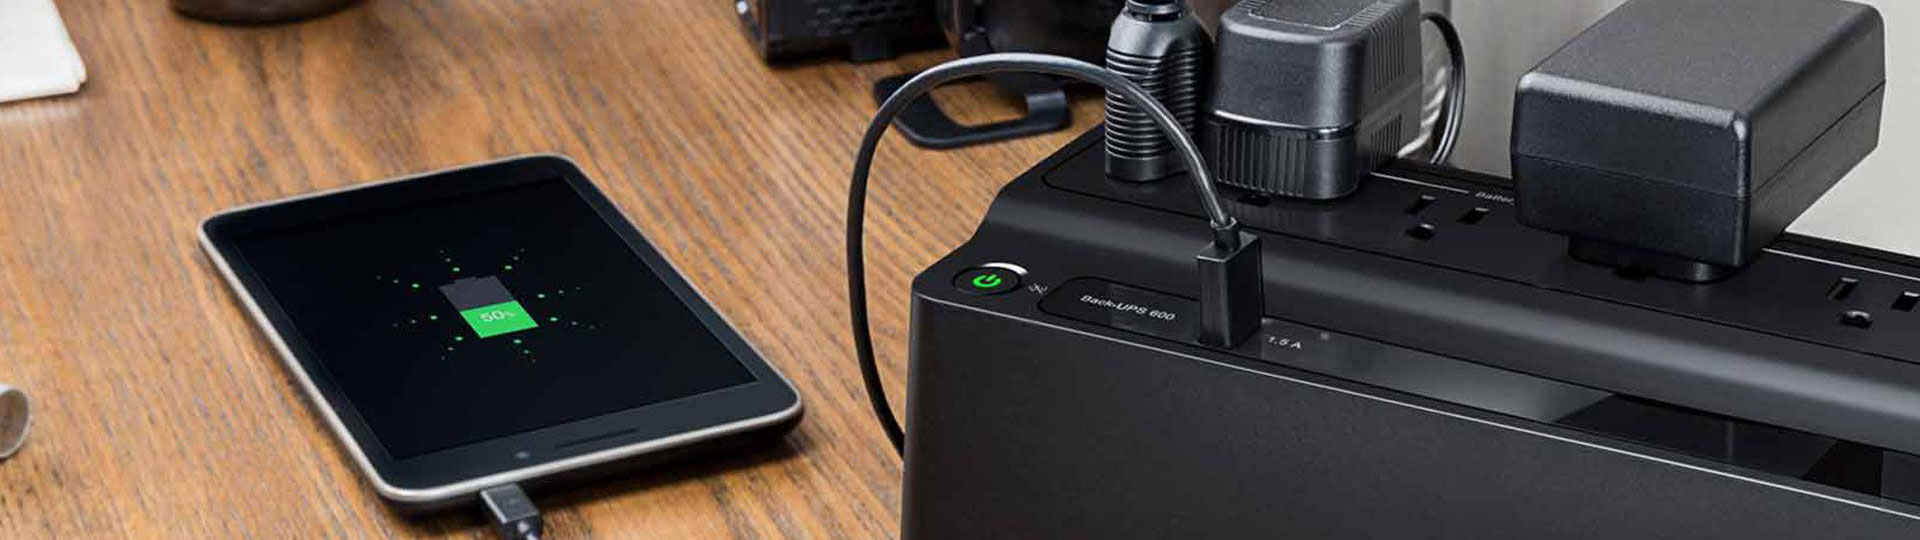 mobile charge with battery backup ups